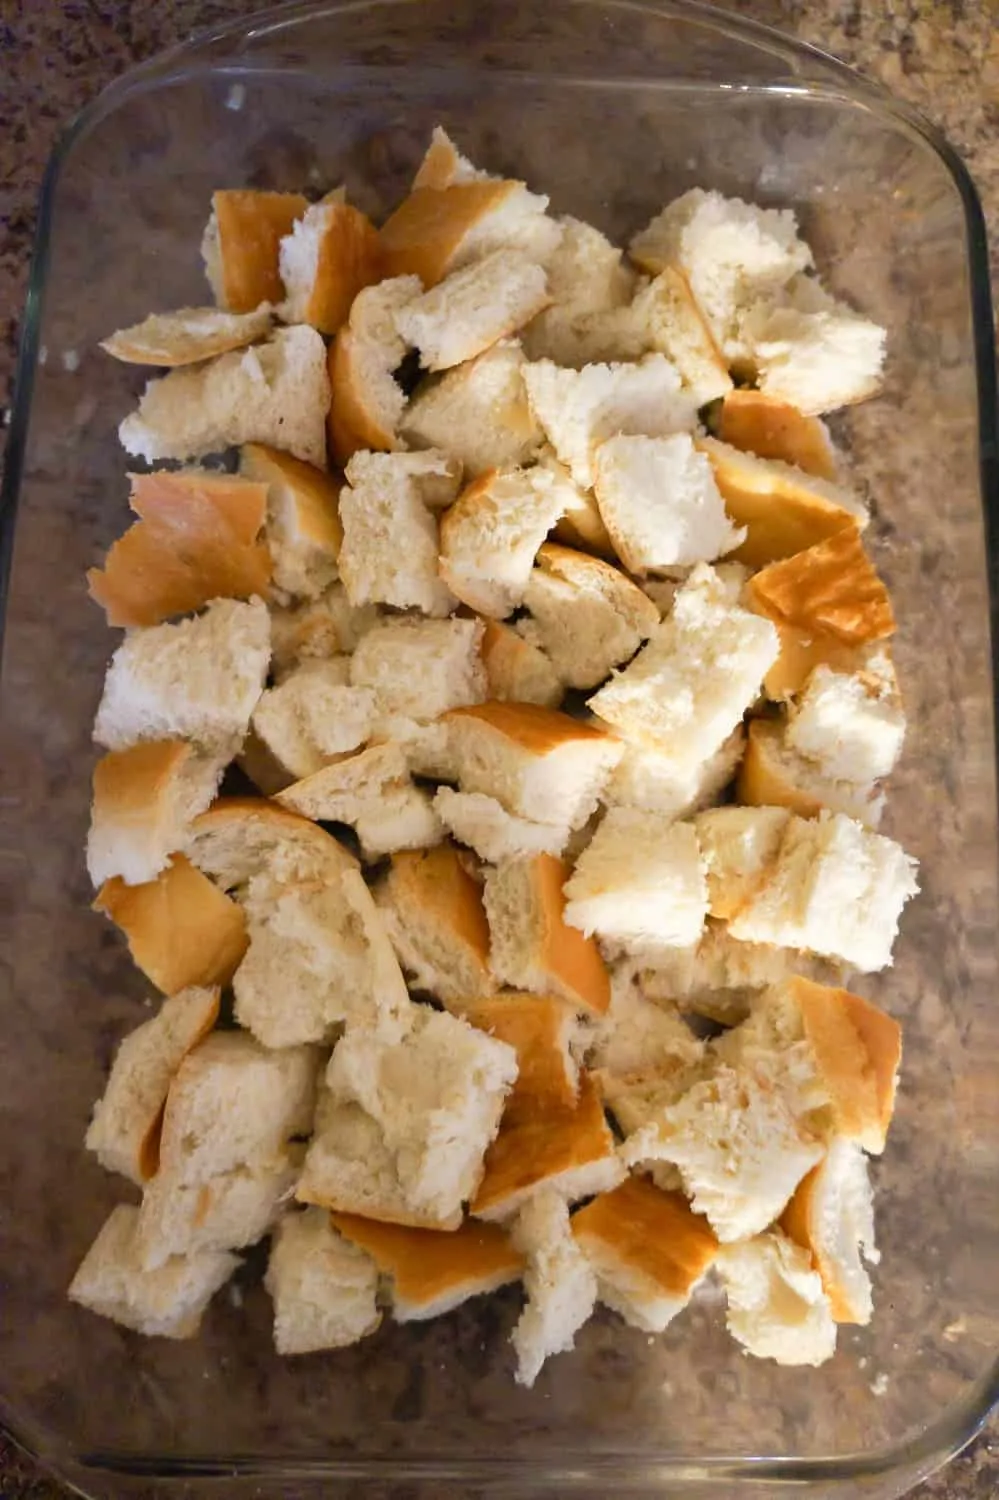 cubes of bread in a baking dish